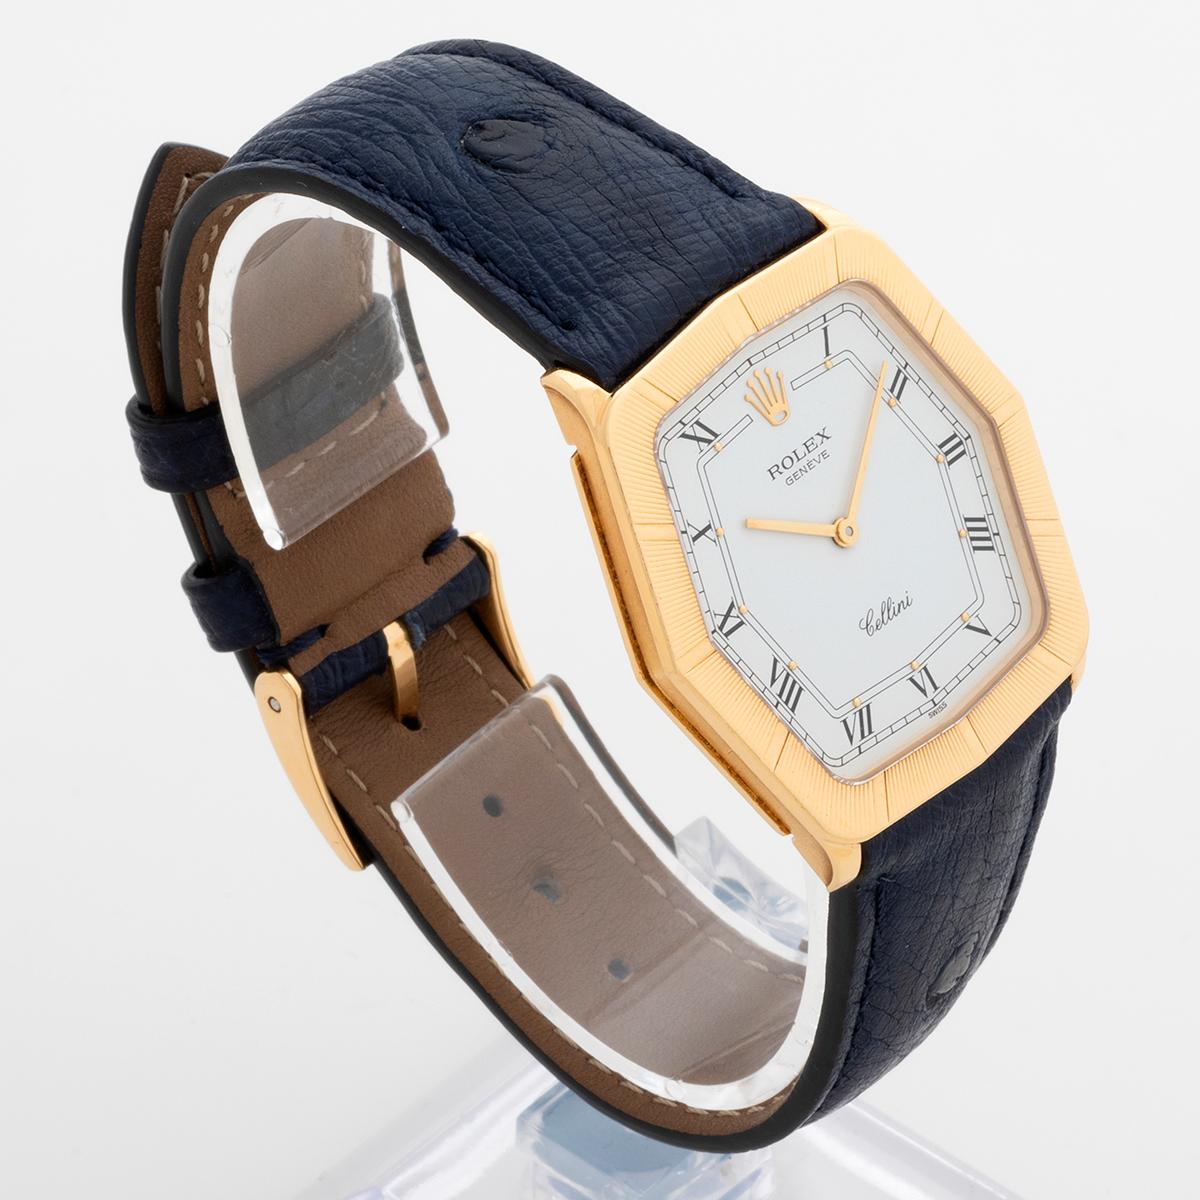 Our rare vintage Rolex Cellini reference 4170 features a 18k yellow gold case of 30mm (exc crown) x 34mm (lug to lug), a manually wound movement and is fitted with a very high quality Jean Rousseau leather strap with gold tang buckle (stamped 750).